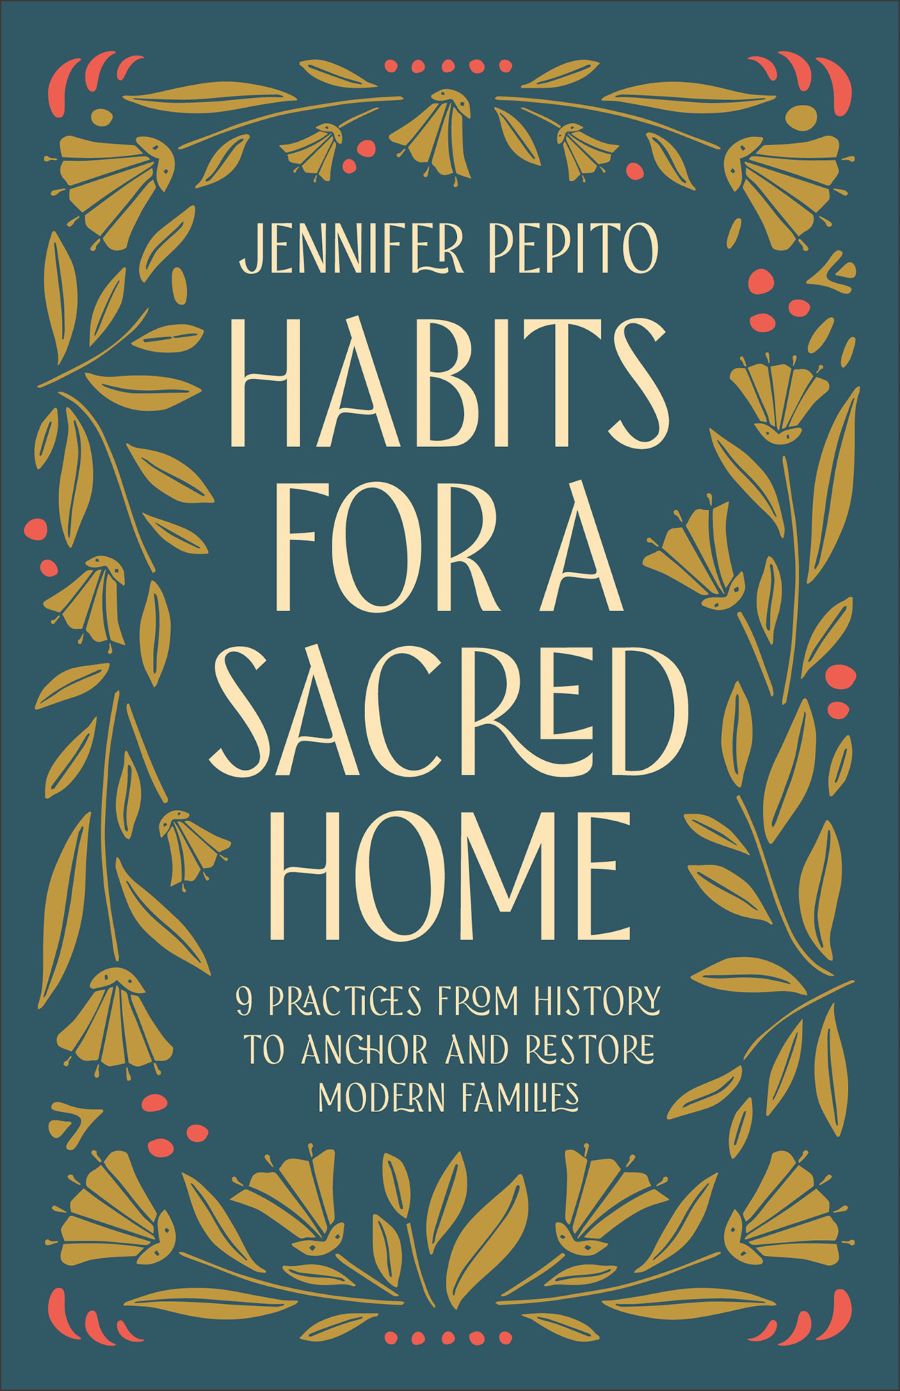 Front cover of Habits For A Sacred Home by Jennifer Pepito.